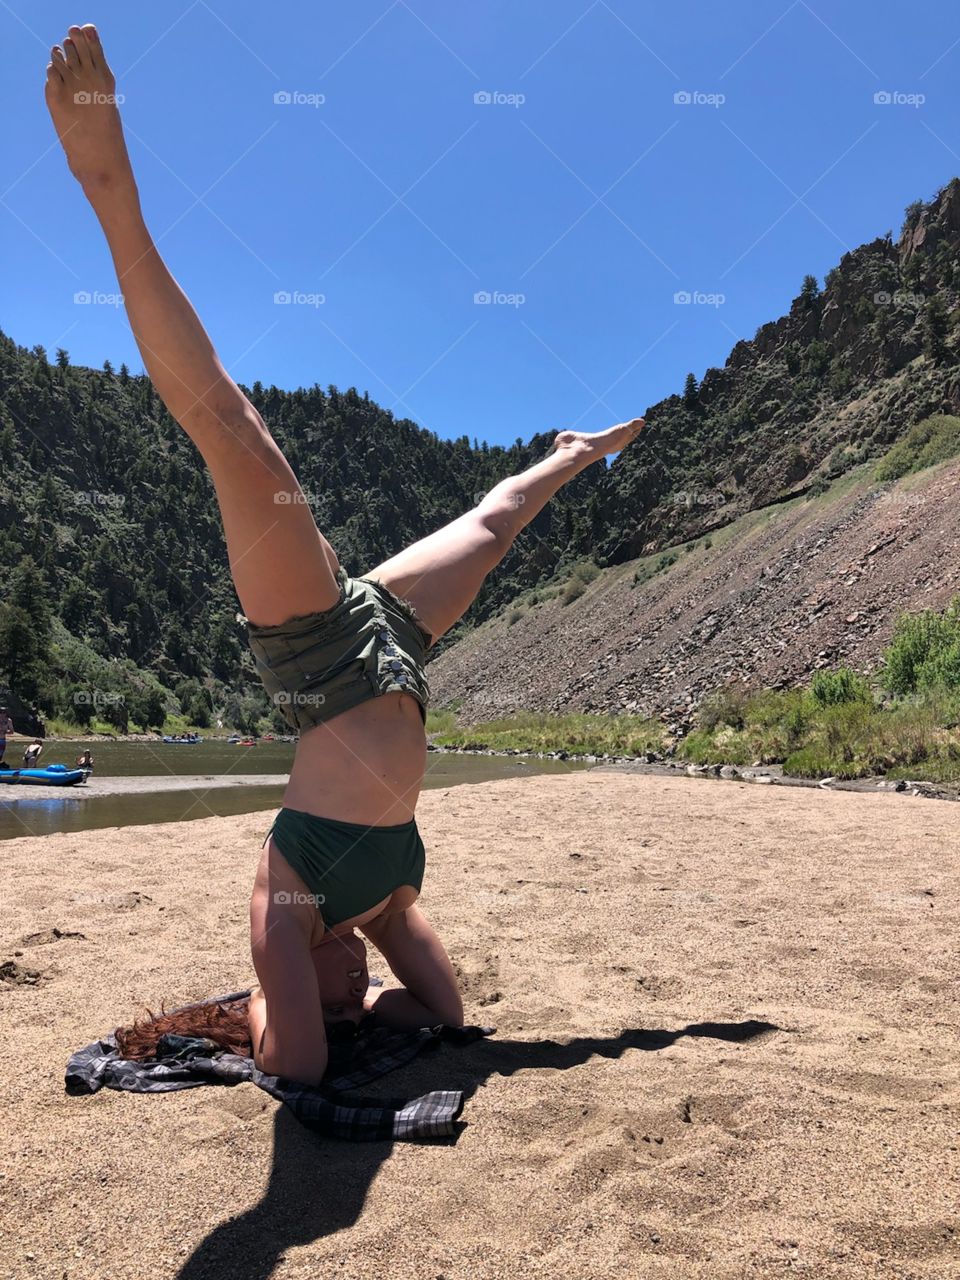 yoga before entering the rapids area of the river on the Colorado